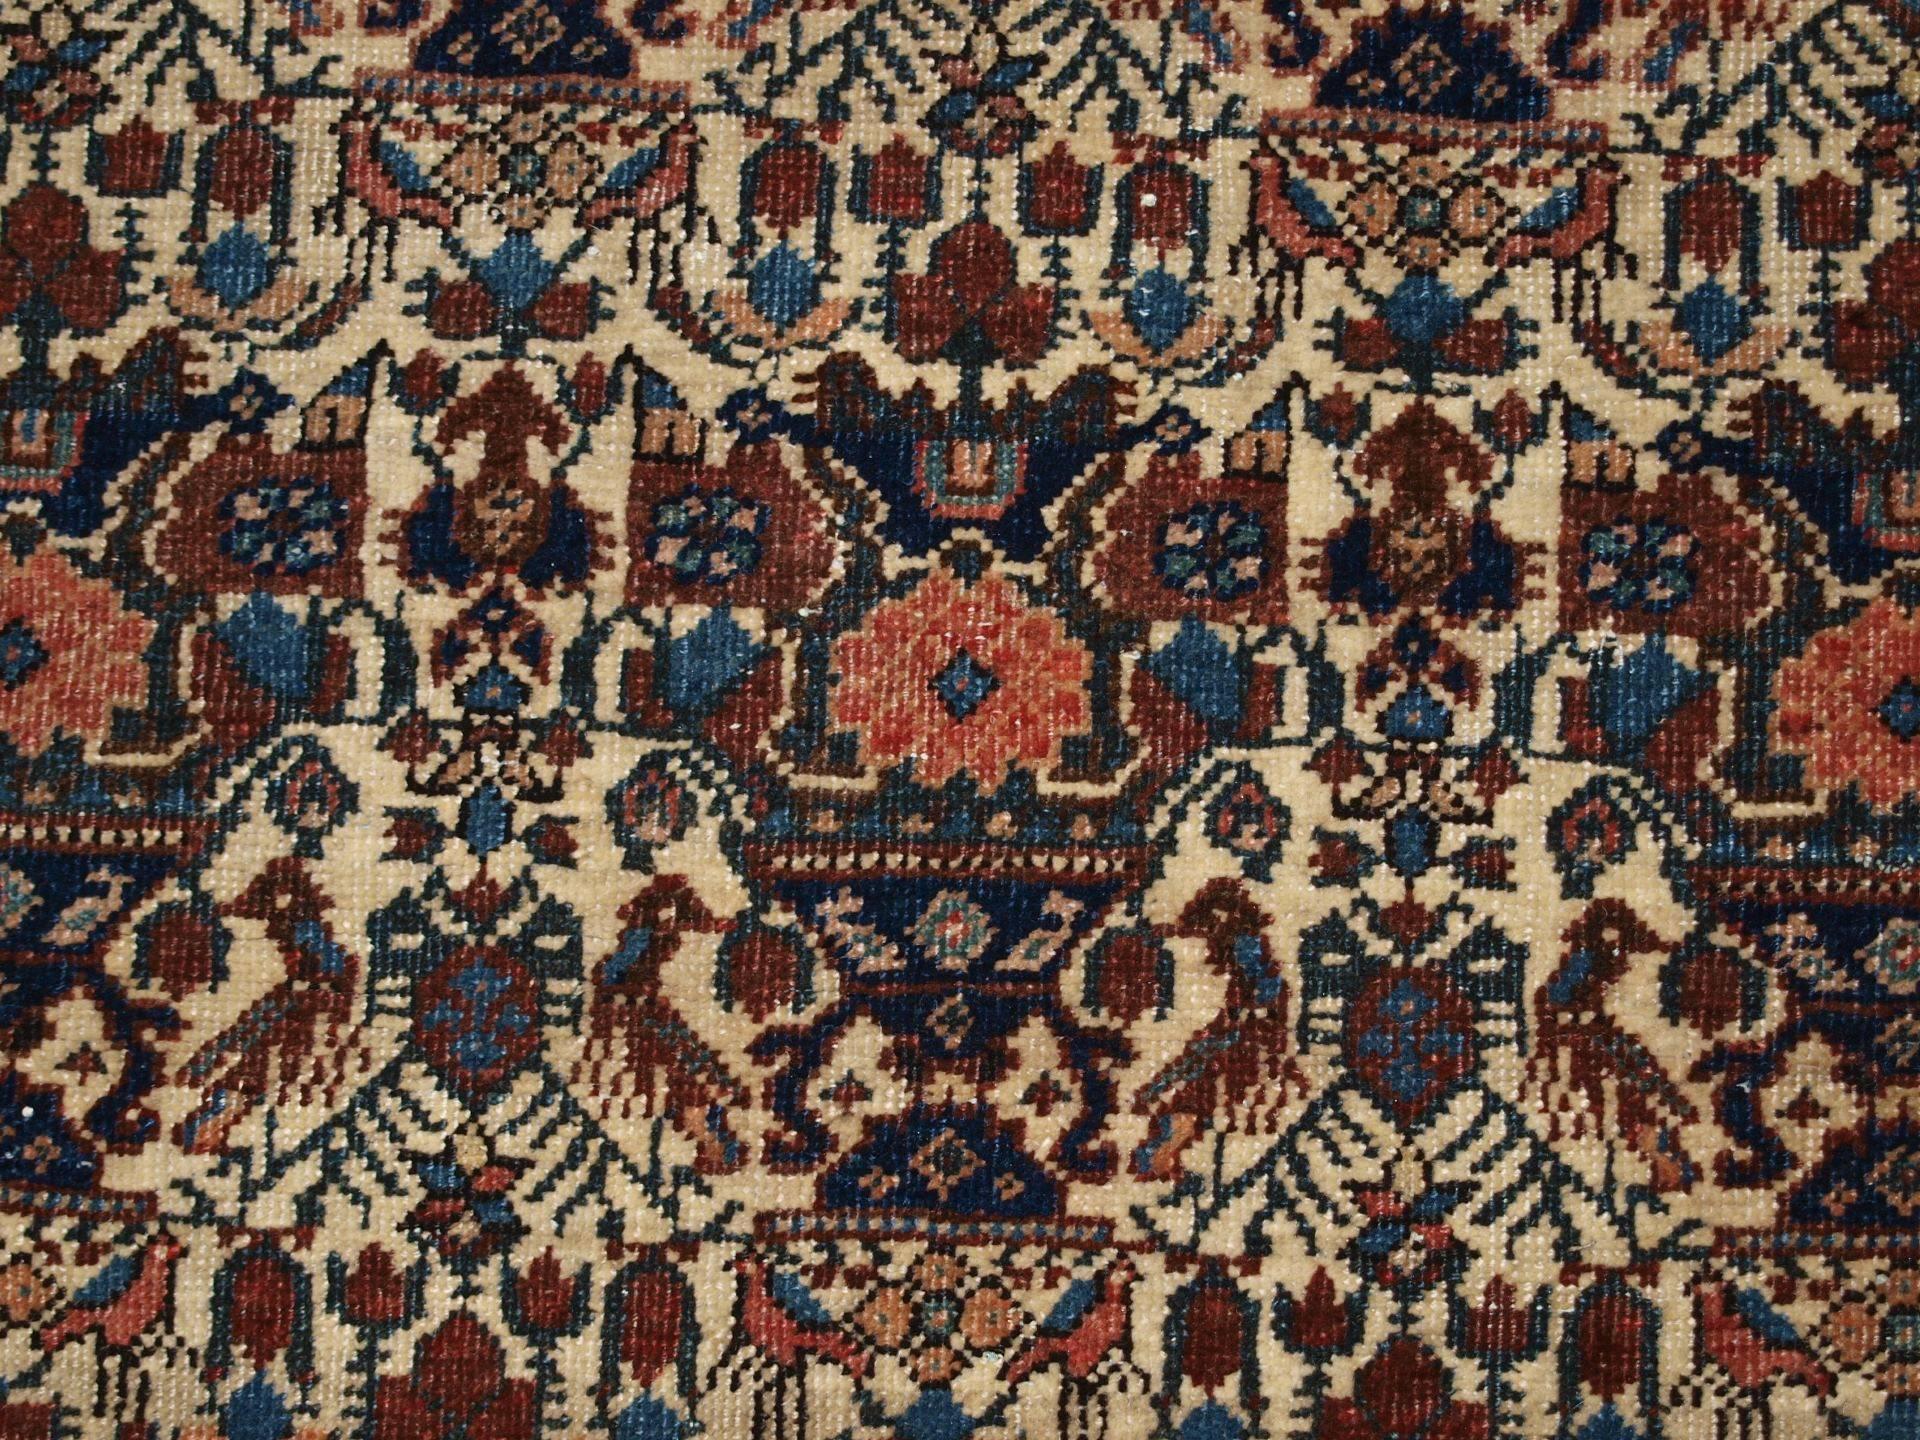 Antique Abedeh Rug with the Classic ‘Vase and Peacock’ Design, circa 1900-1920 1